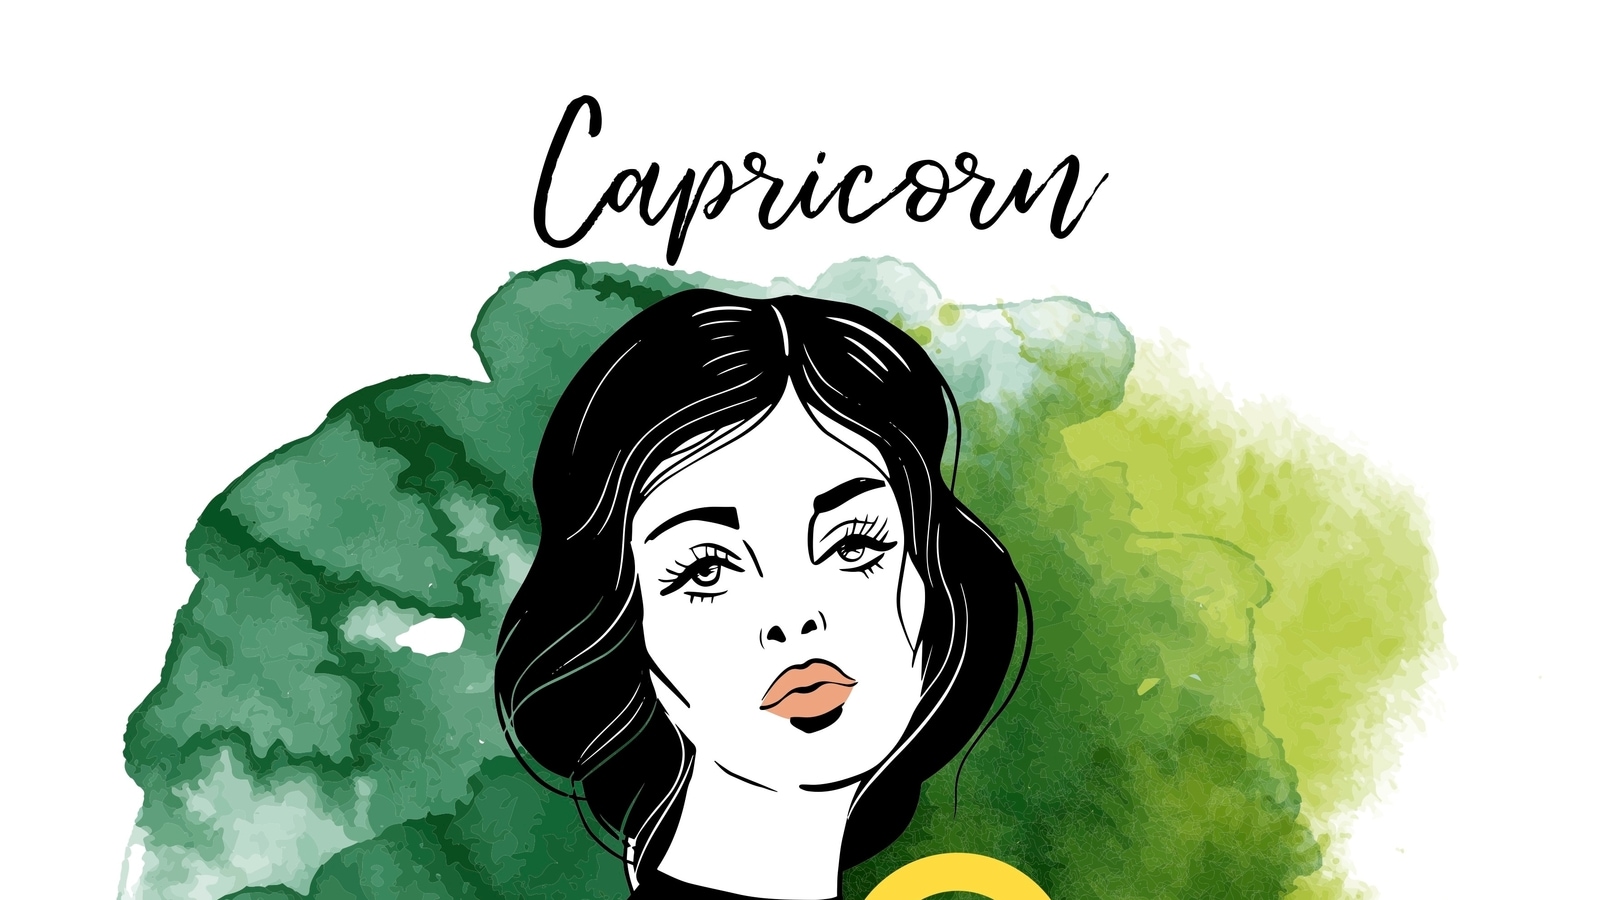 Capricorn Daily Horoscope for February 16: Expect changes in life